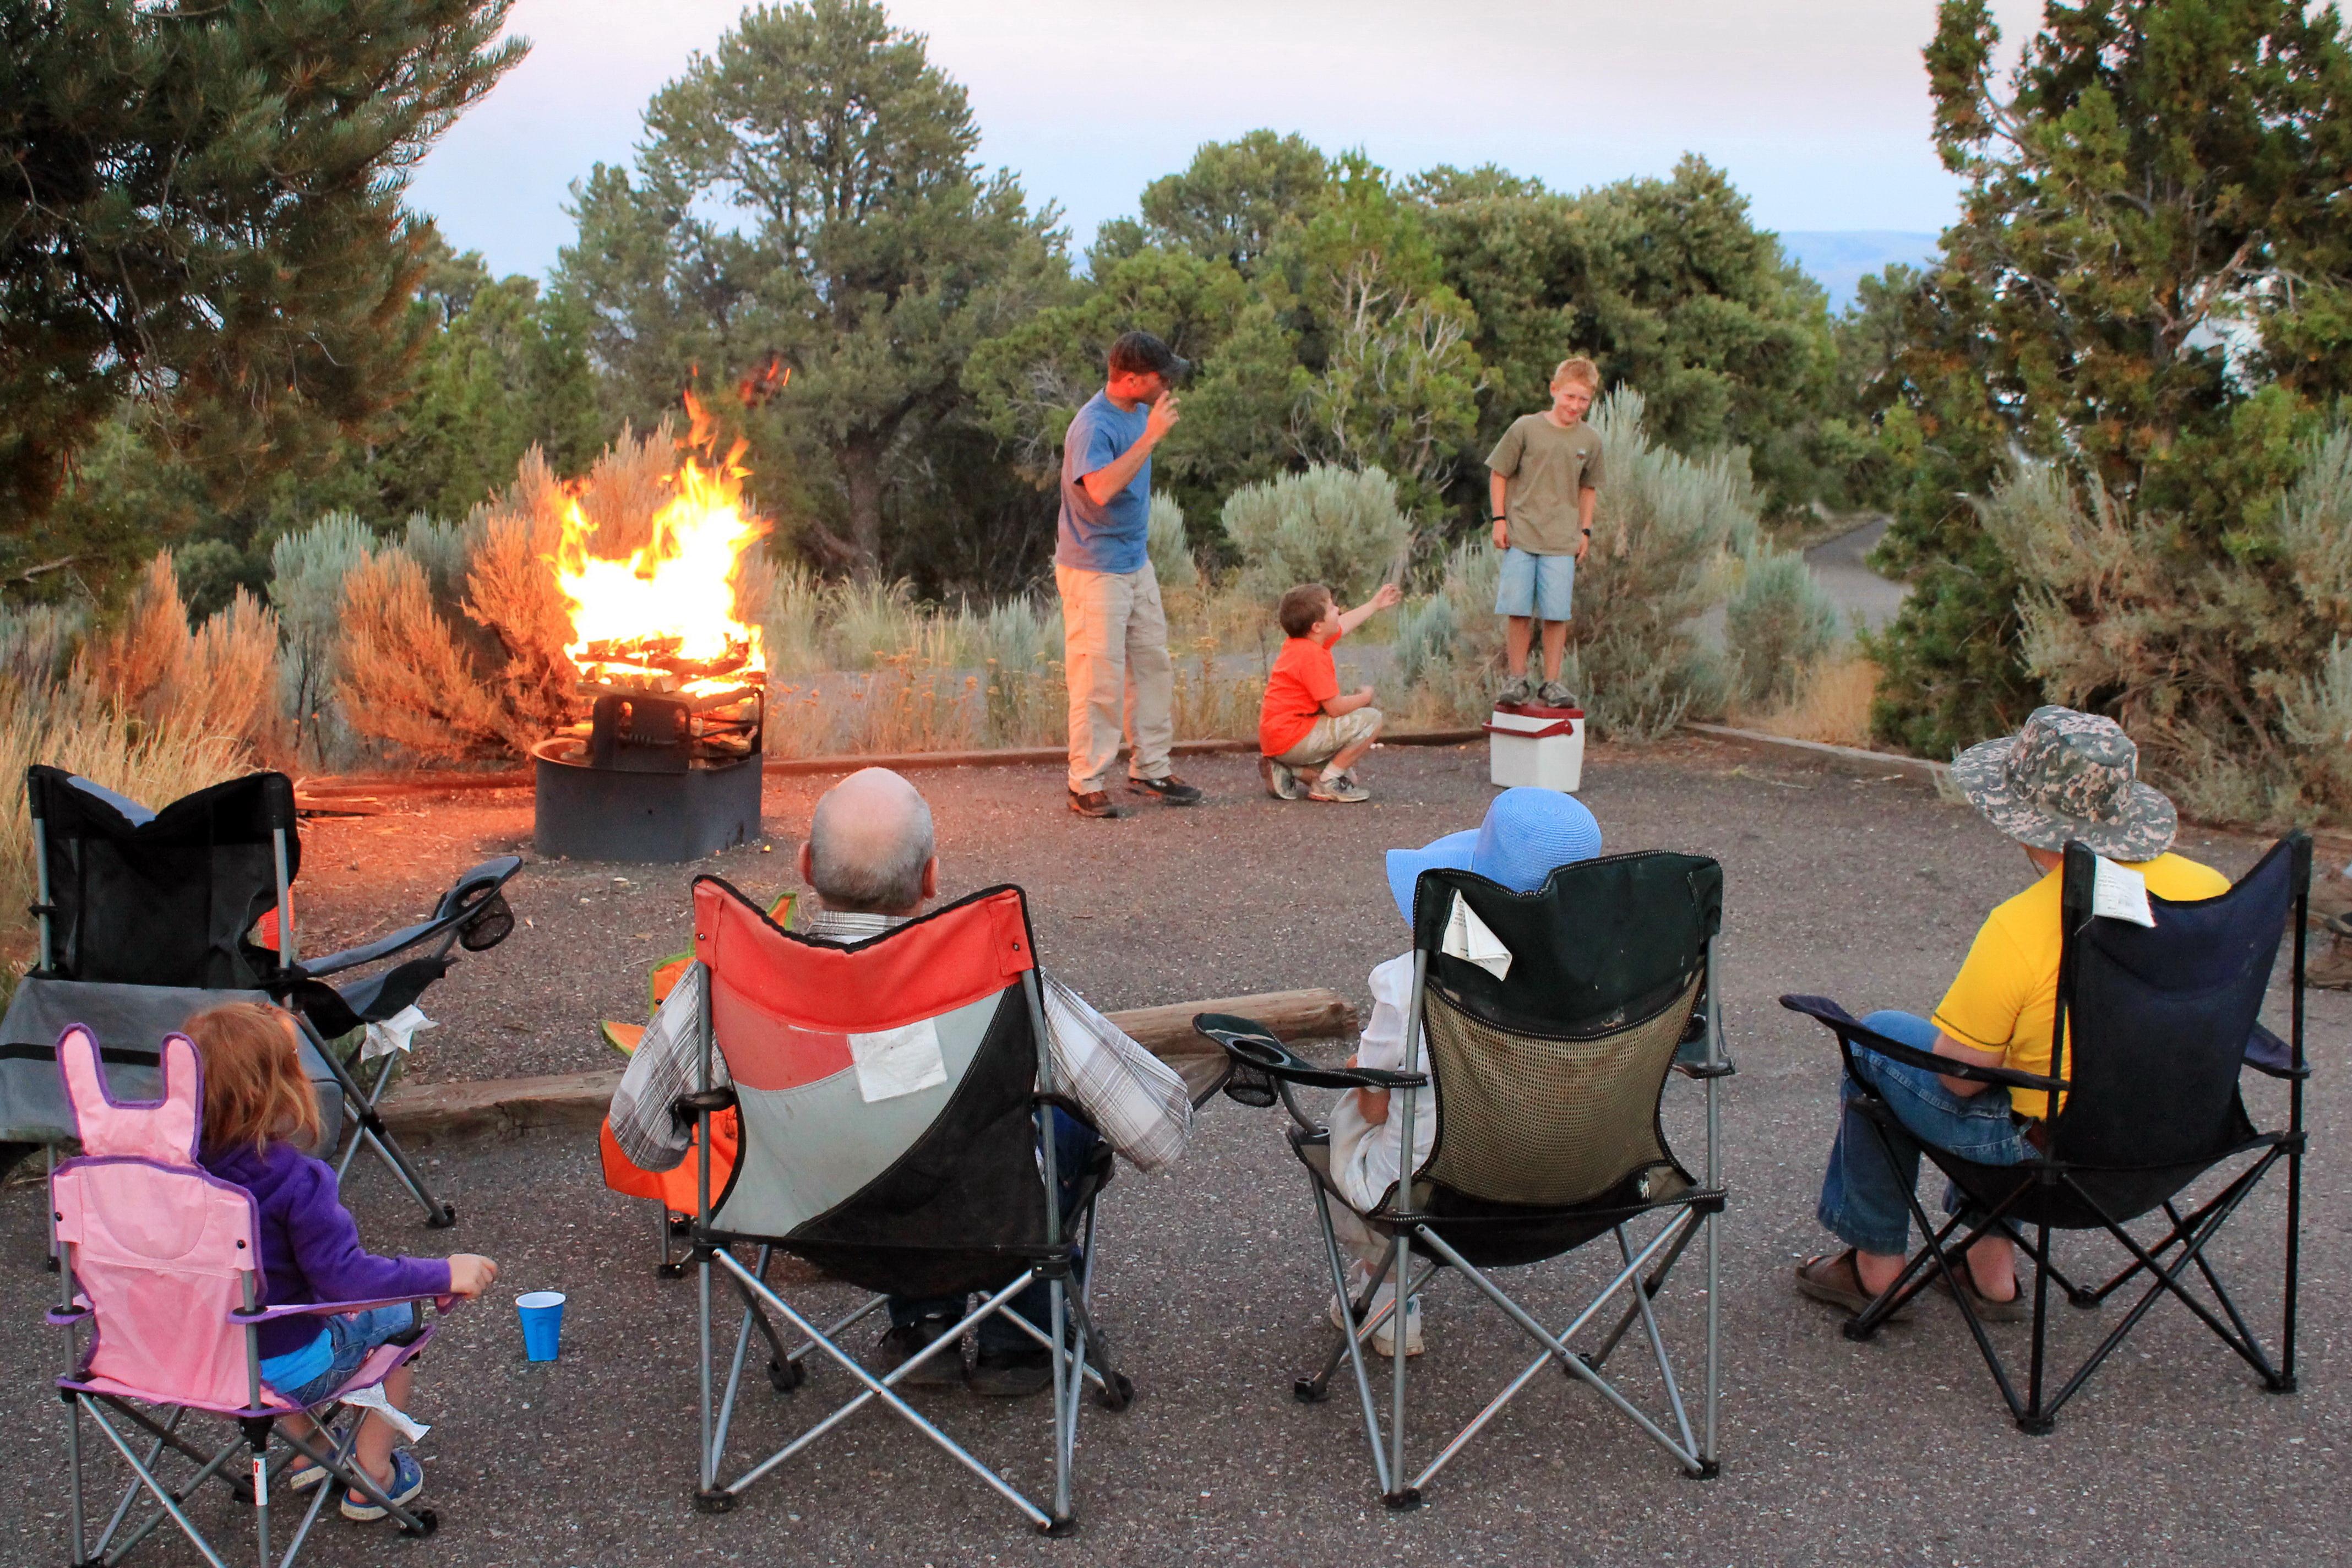 A family is gathered around a blazing campfire in the evening.